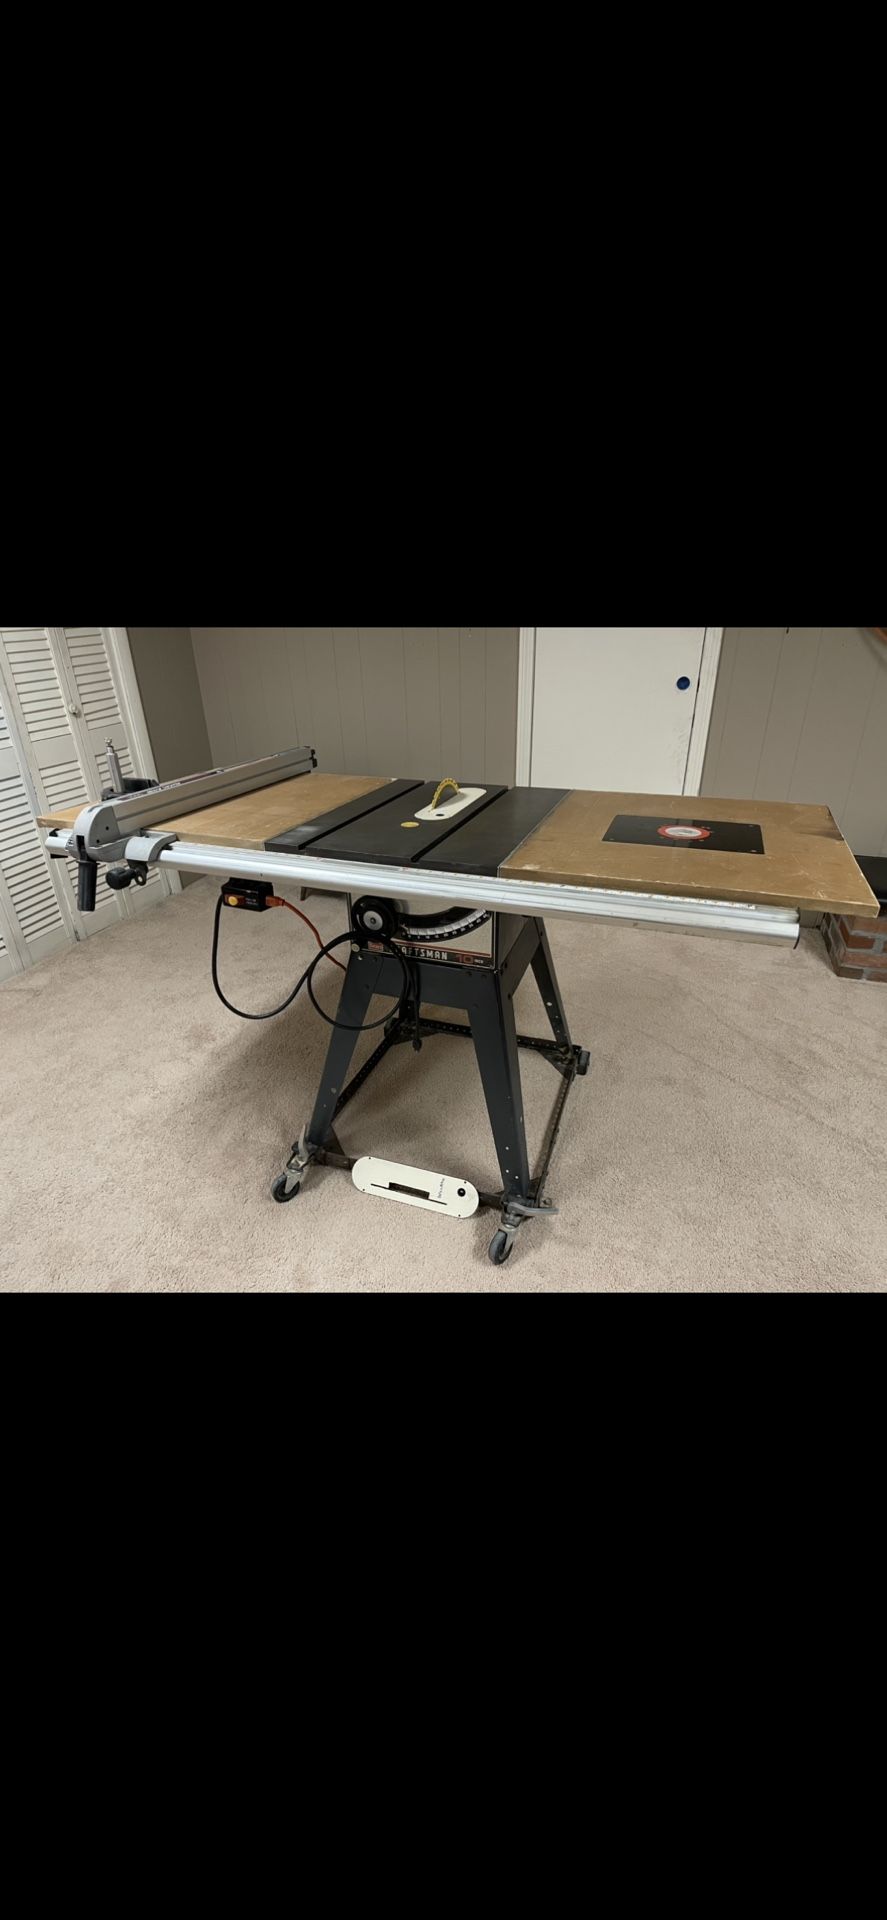 10” Table Saw And Router Table Combo